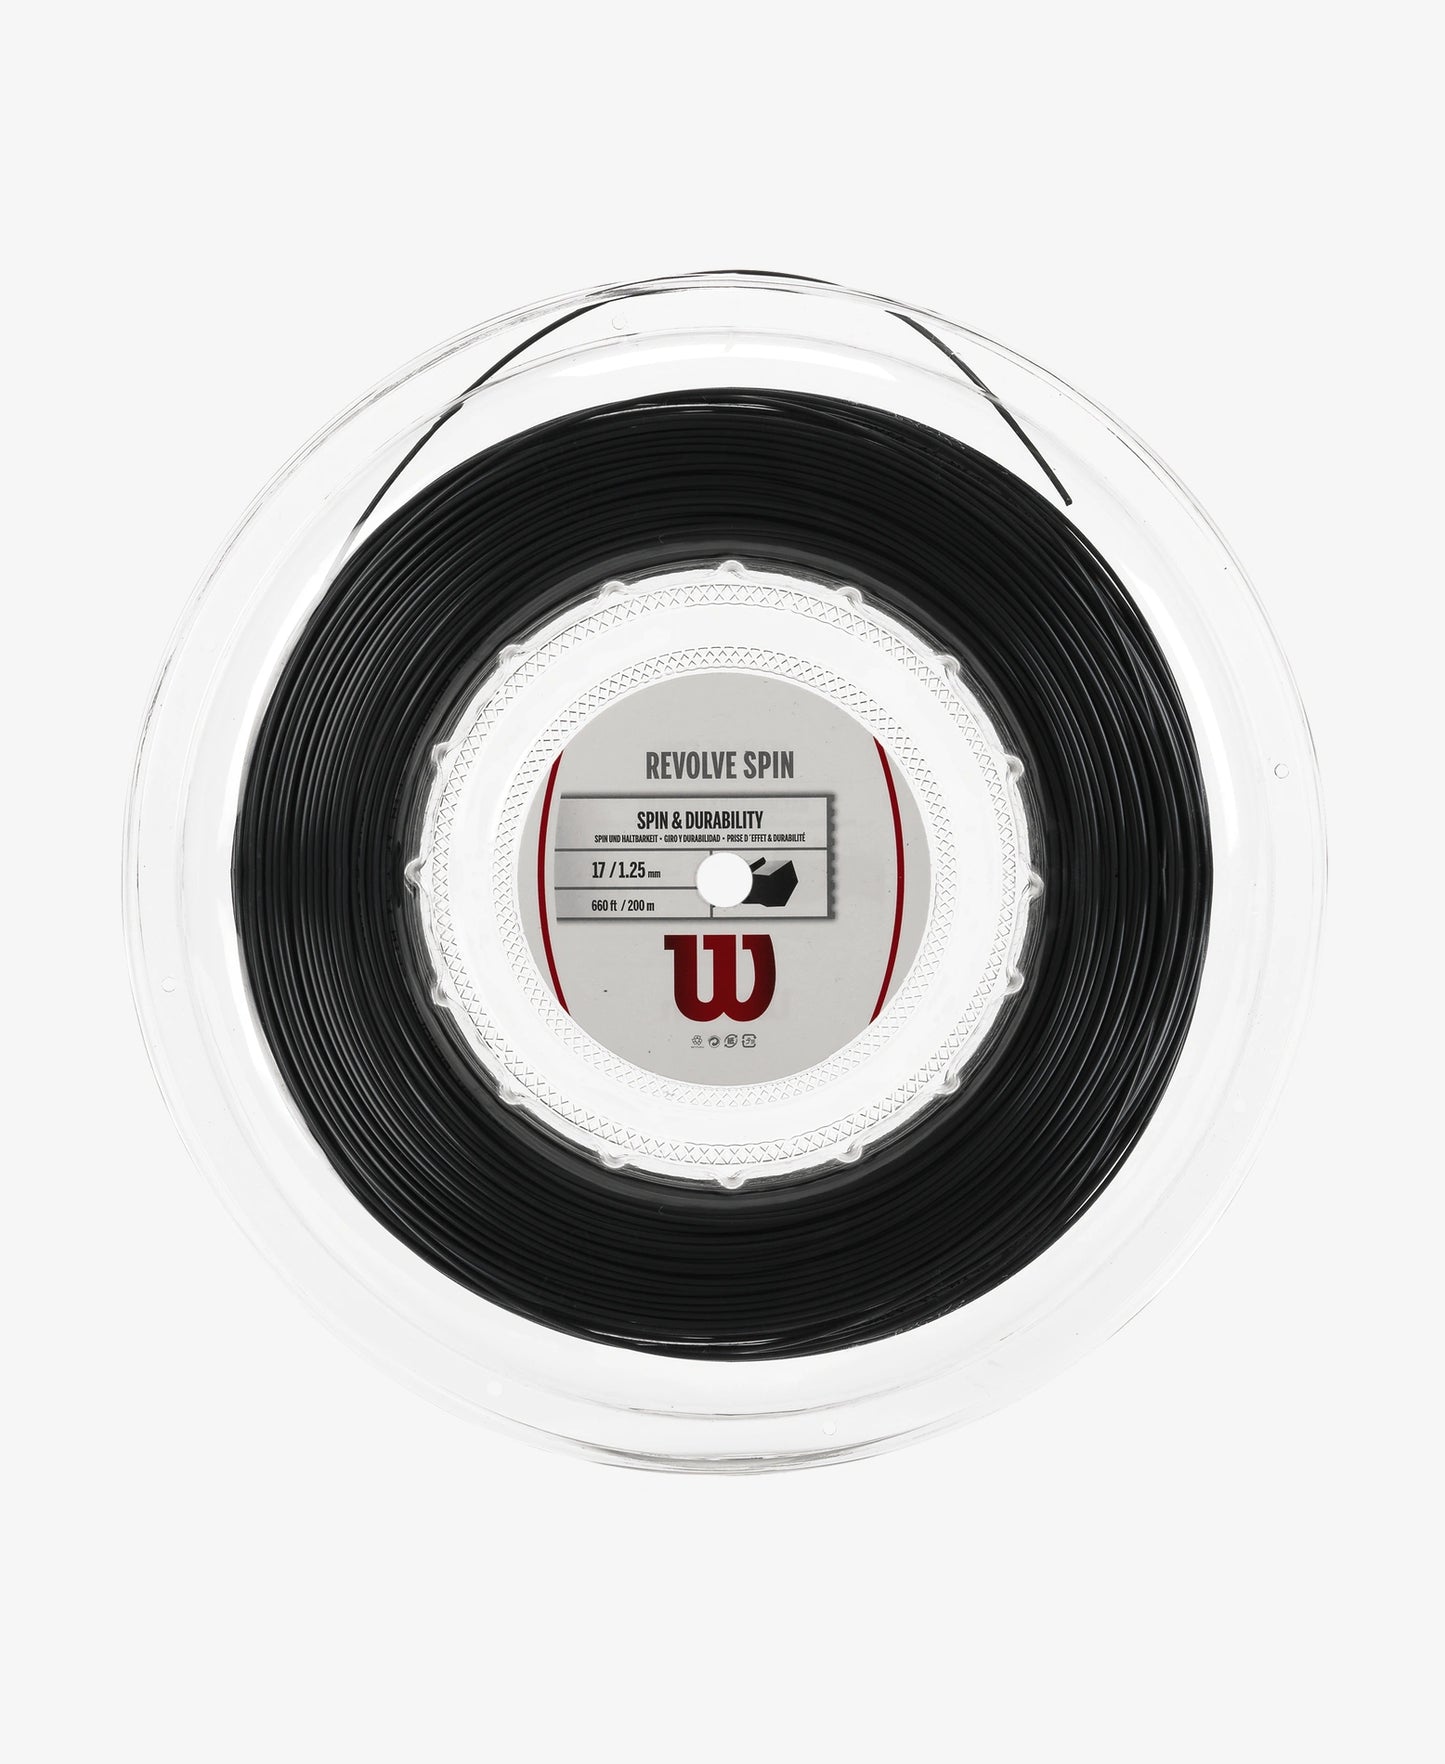 A 200 metre reel of Wilson Revolve Spin 17 Tennis String available for sale at GSM Sports.    